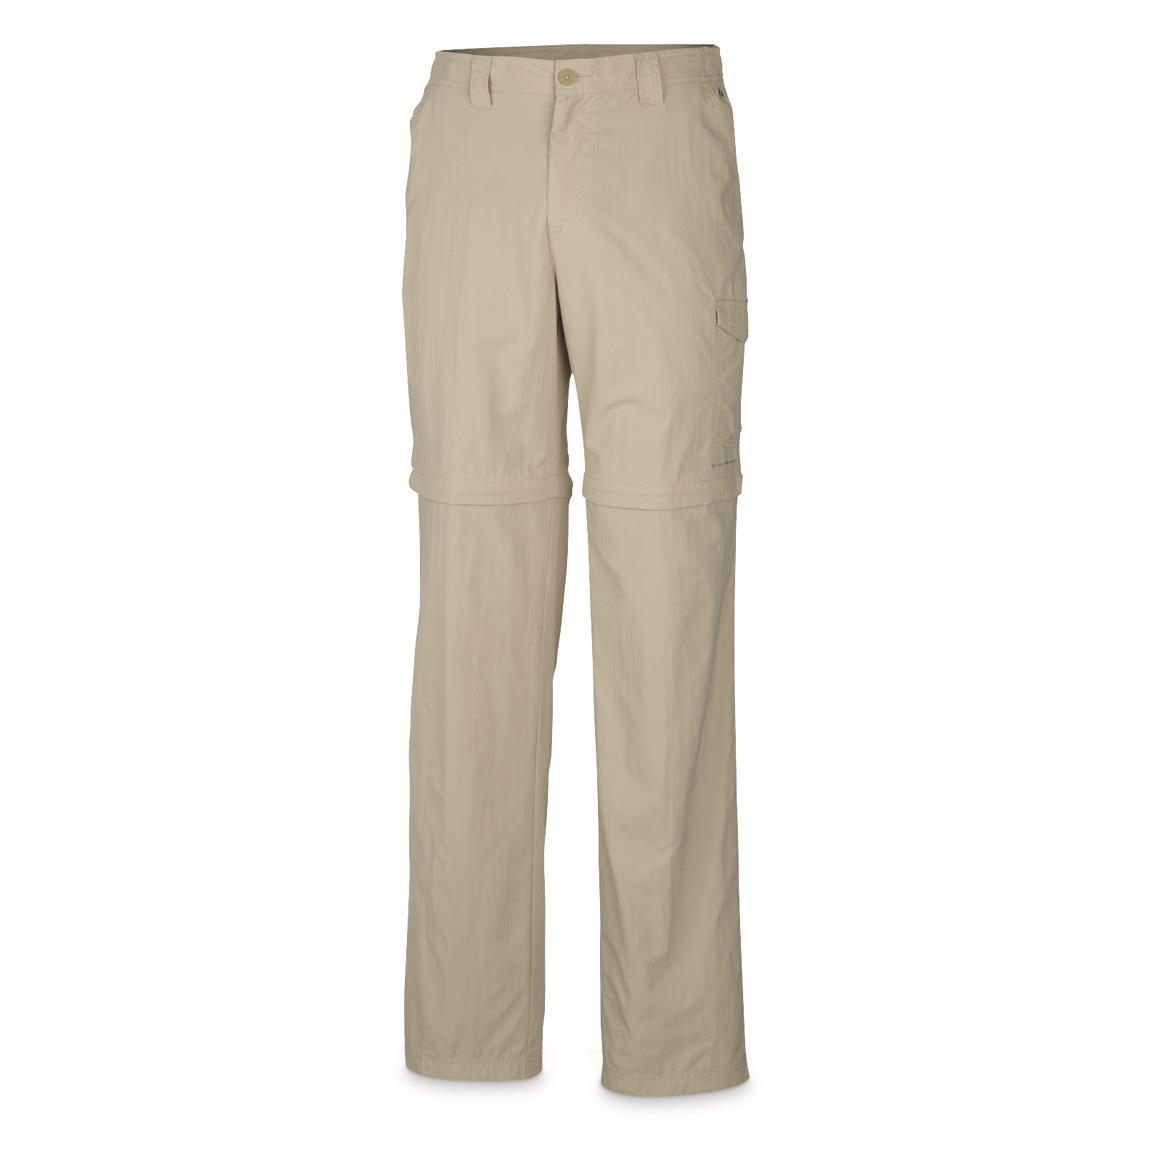 Columbia Men S Pfg Blood And Guts Iii Convertible Pants Jeans Pants At Sportsman S Guide